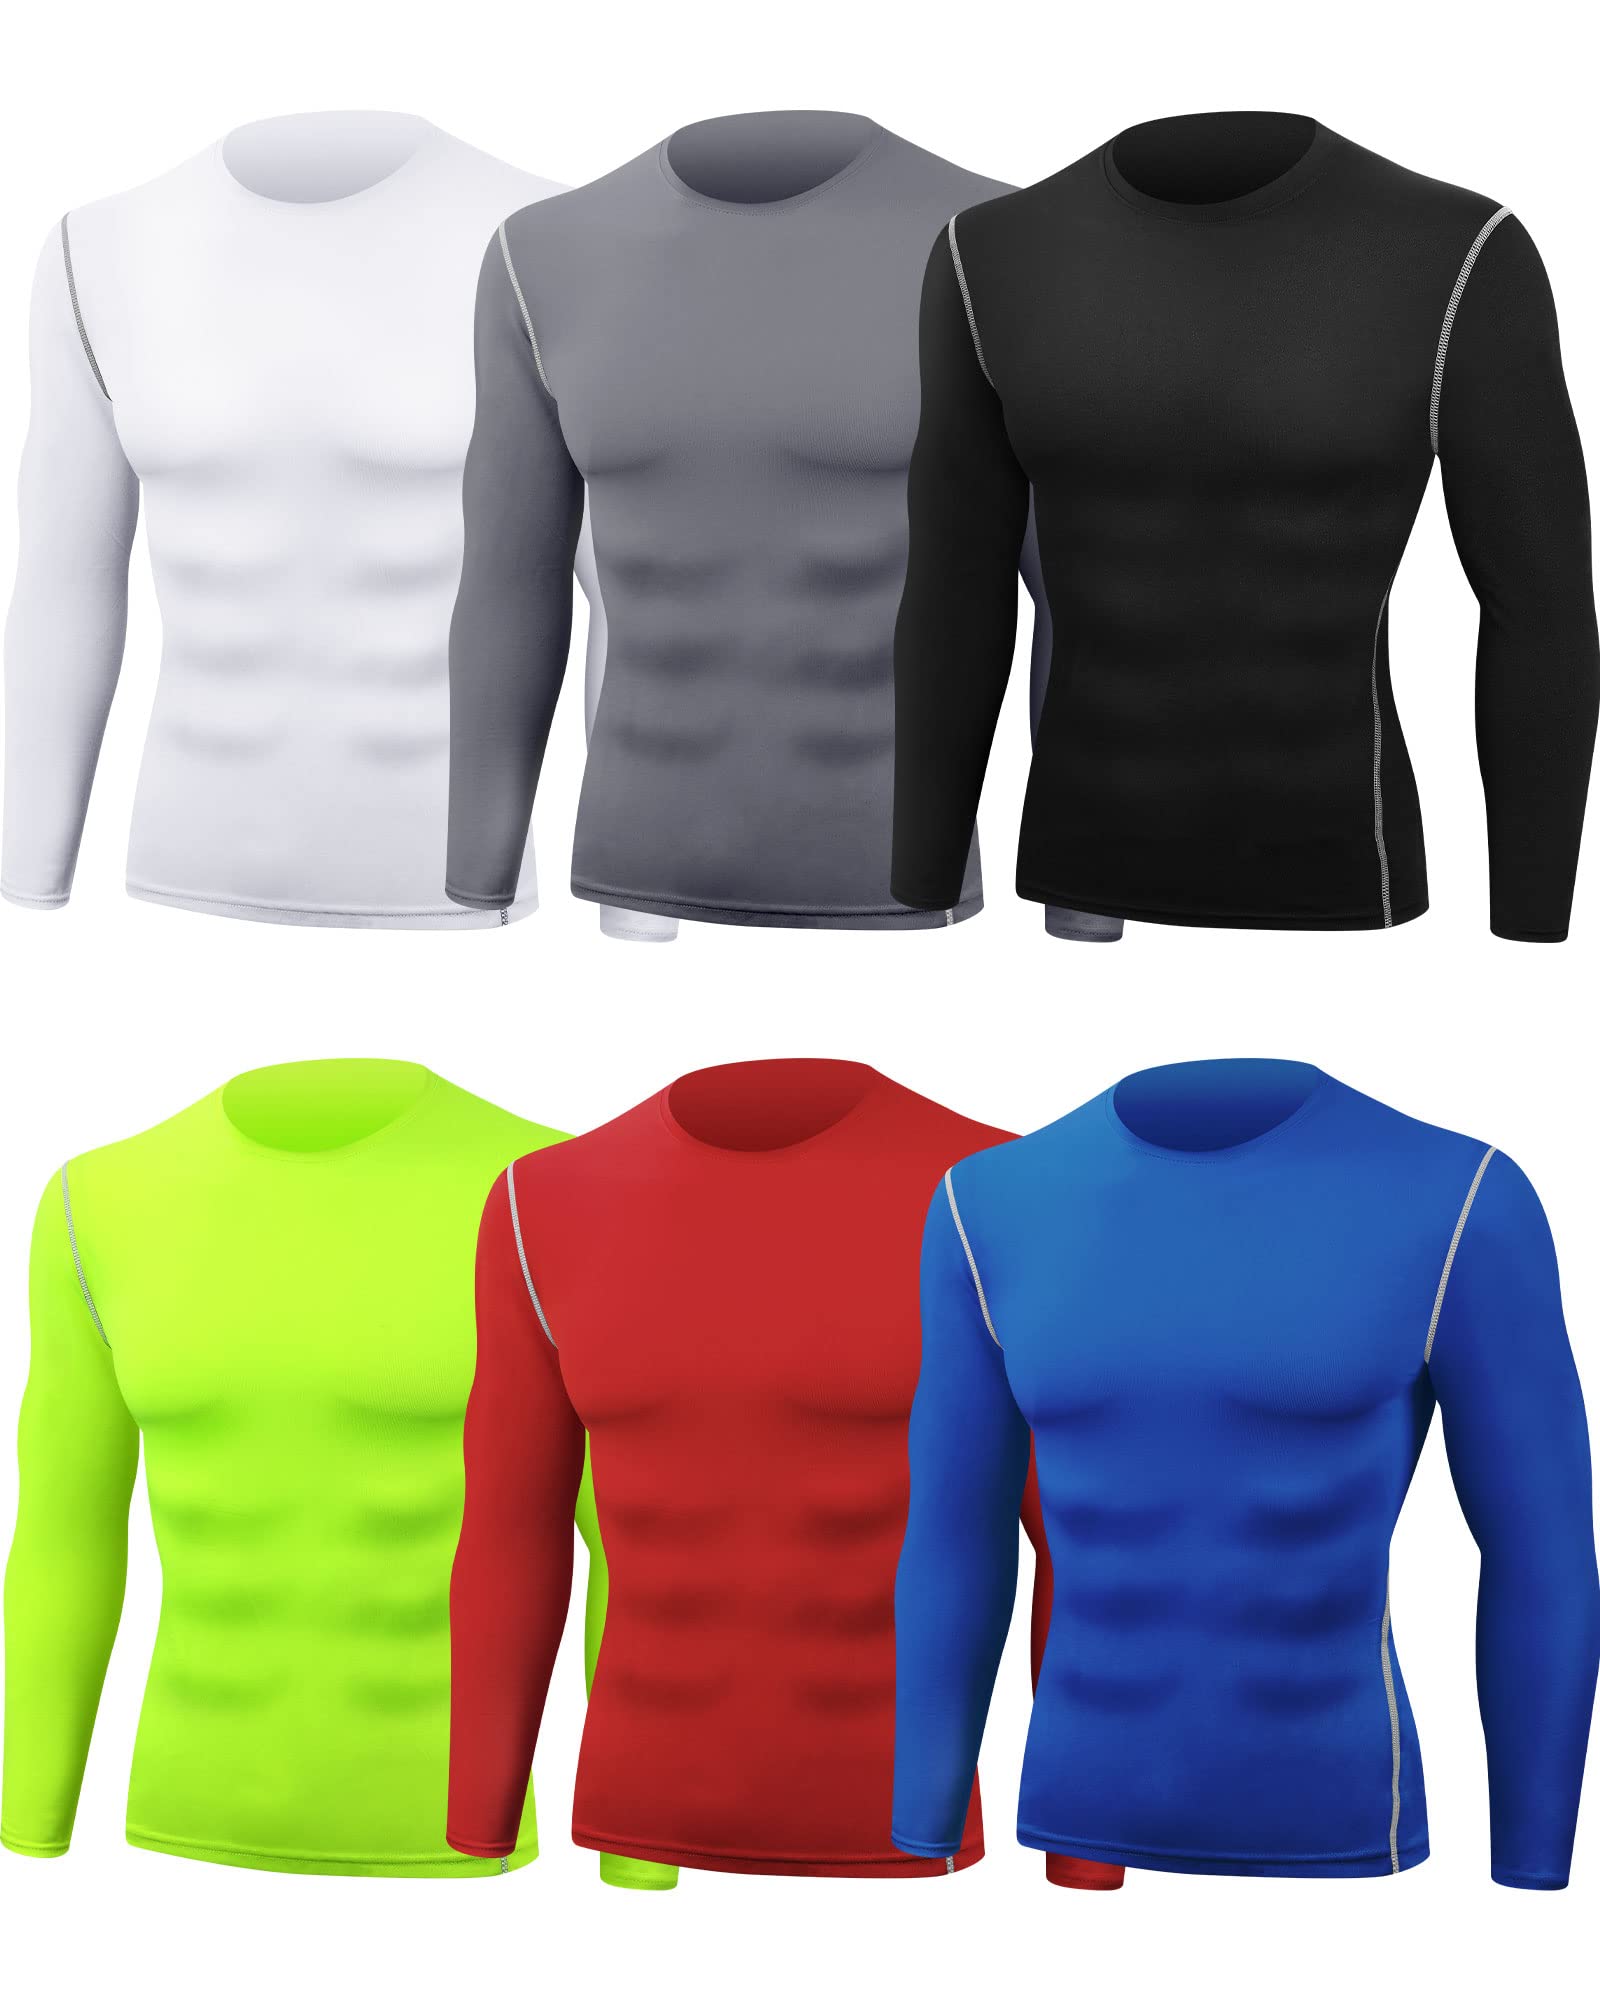 Hicarer 6 Pack Men's Athletic Compression Shirts Dry Athletic